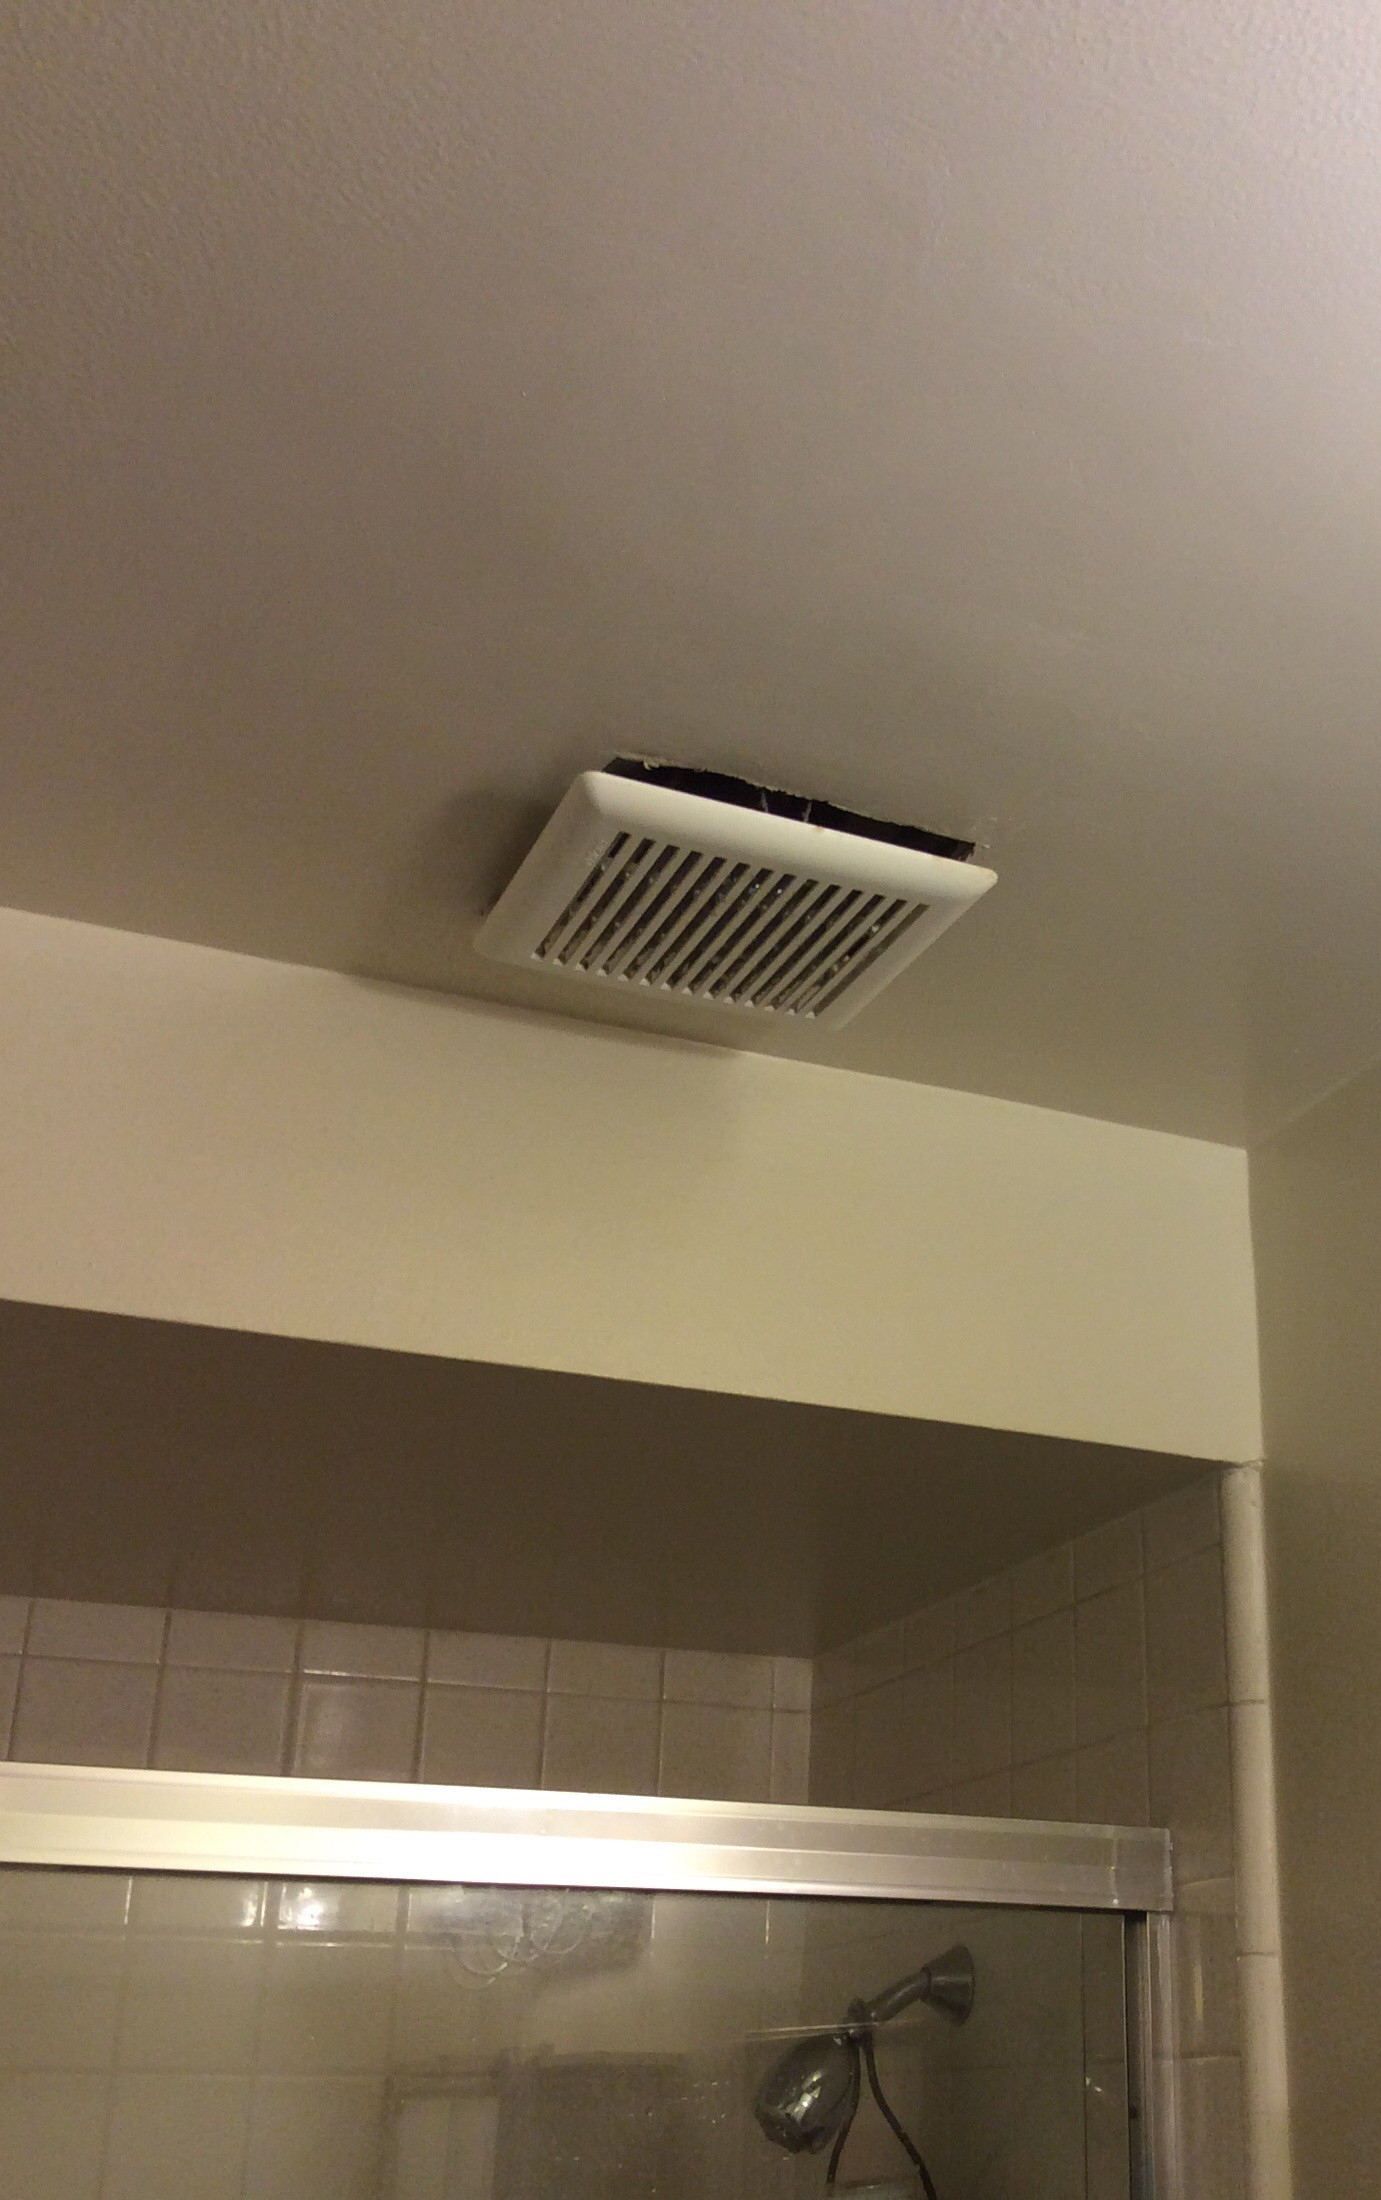 Is It Normal For An Exhaust Fan Cover To Hang Below The intended for size 1381 X 2200